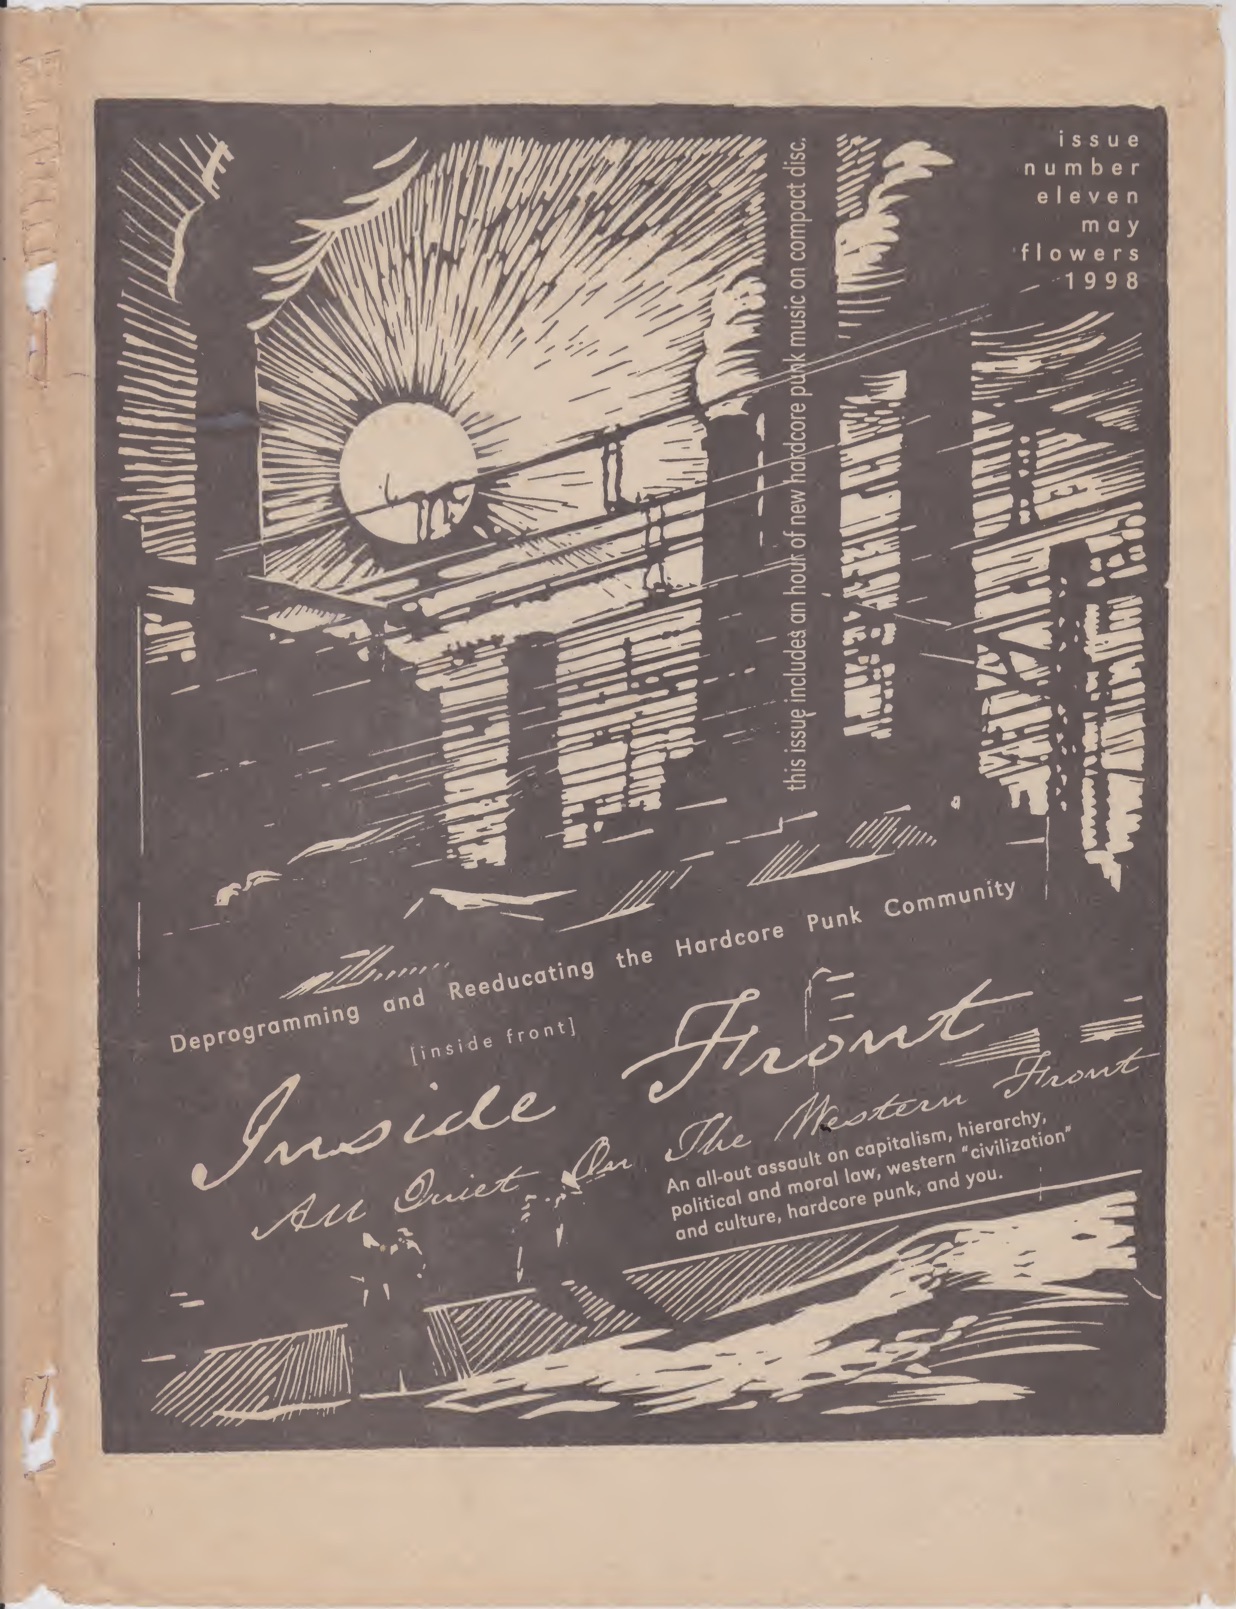 Photo of ‘Inside Front #11’ front cover